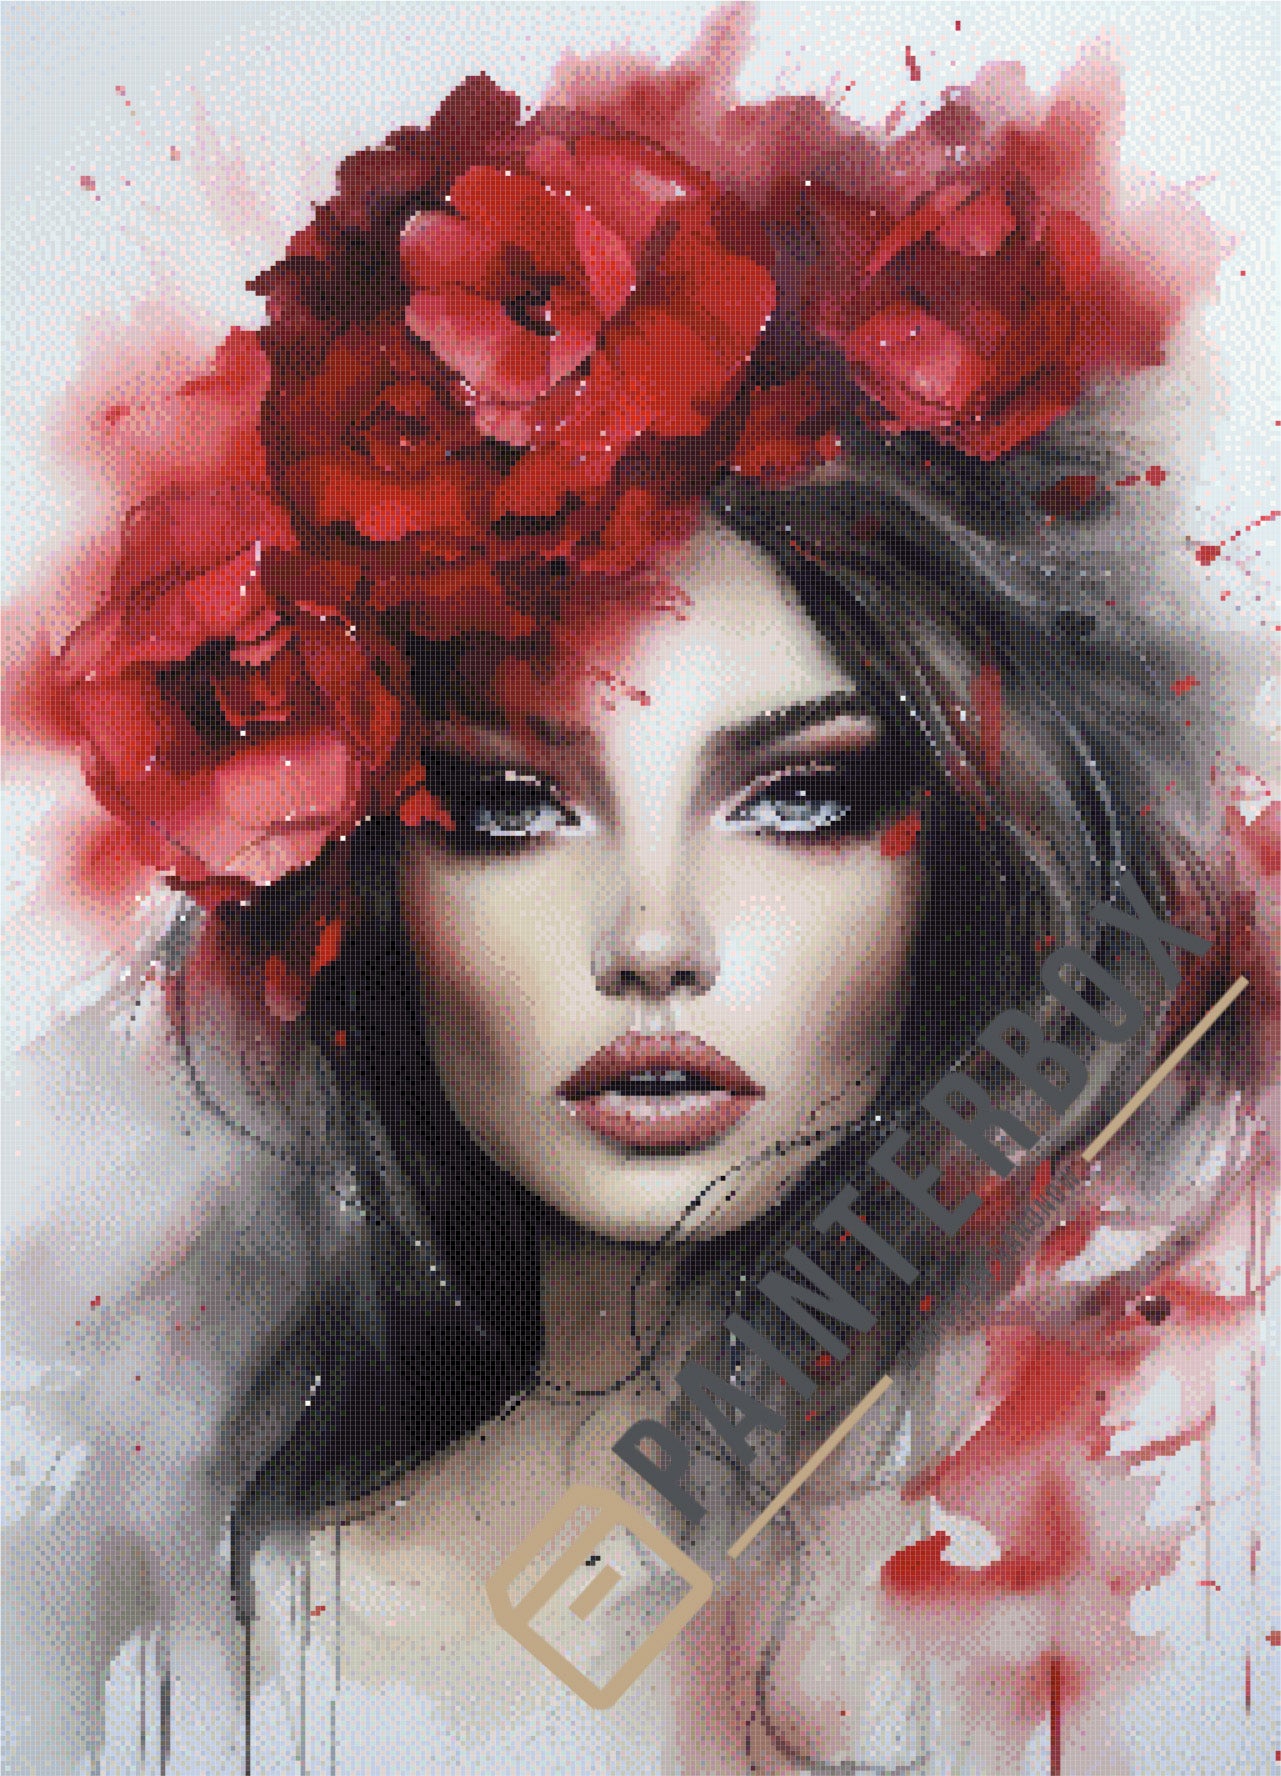 Red Flower Lady by PixxChicks - 120 colors